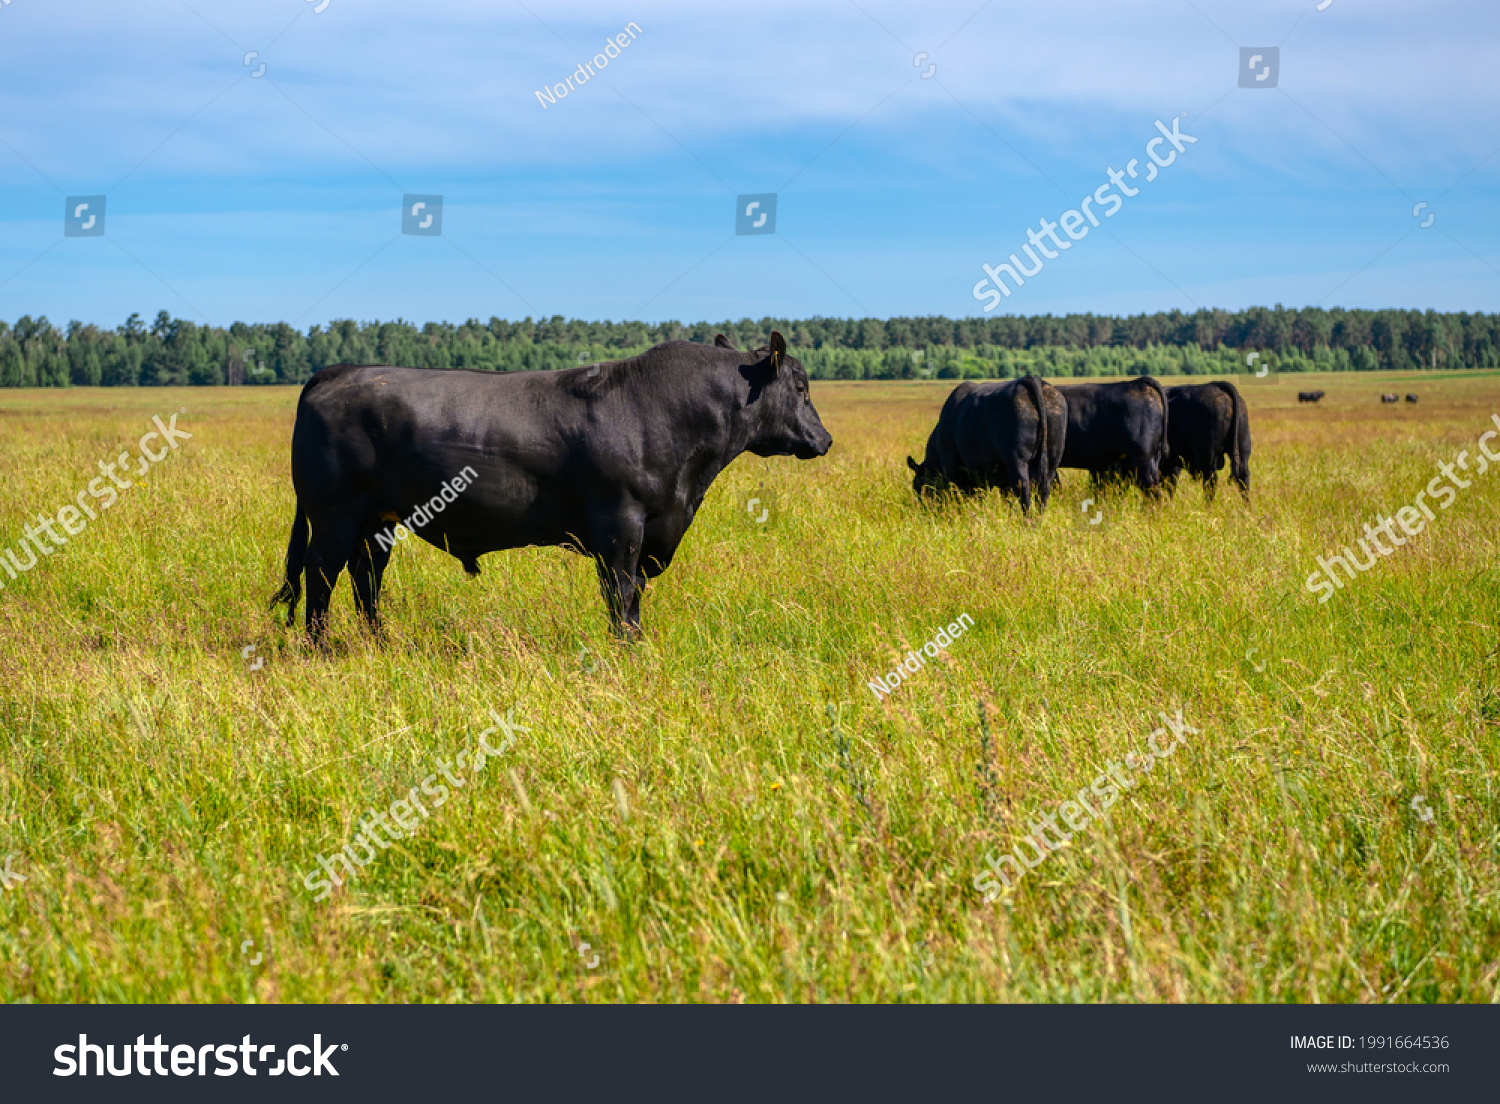 A black angus bull stands on a green grassy field. Agriculture, cattle breeding. #1991664536